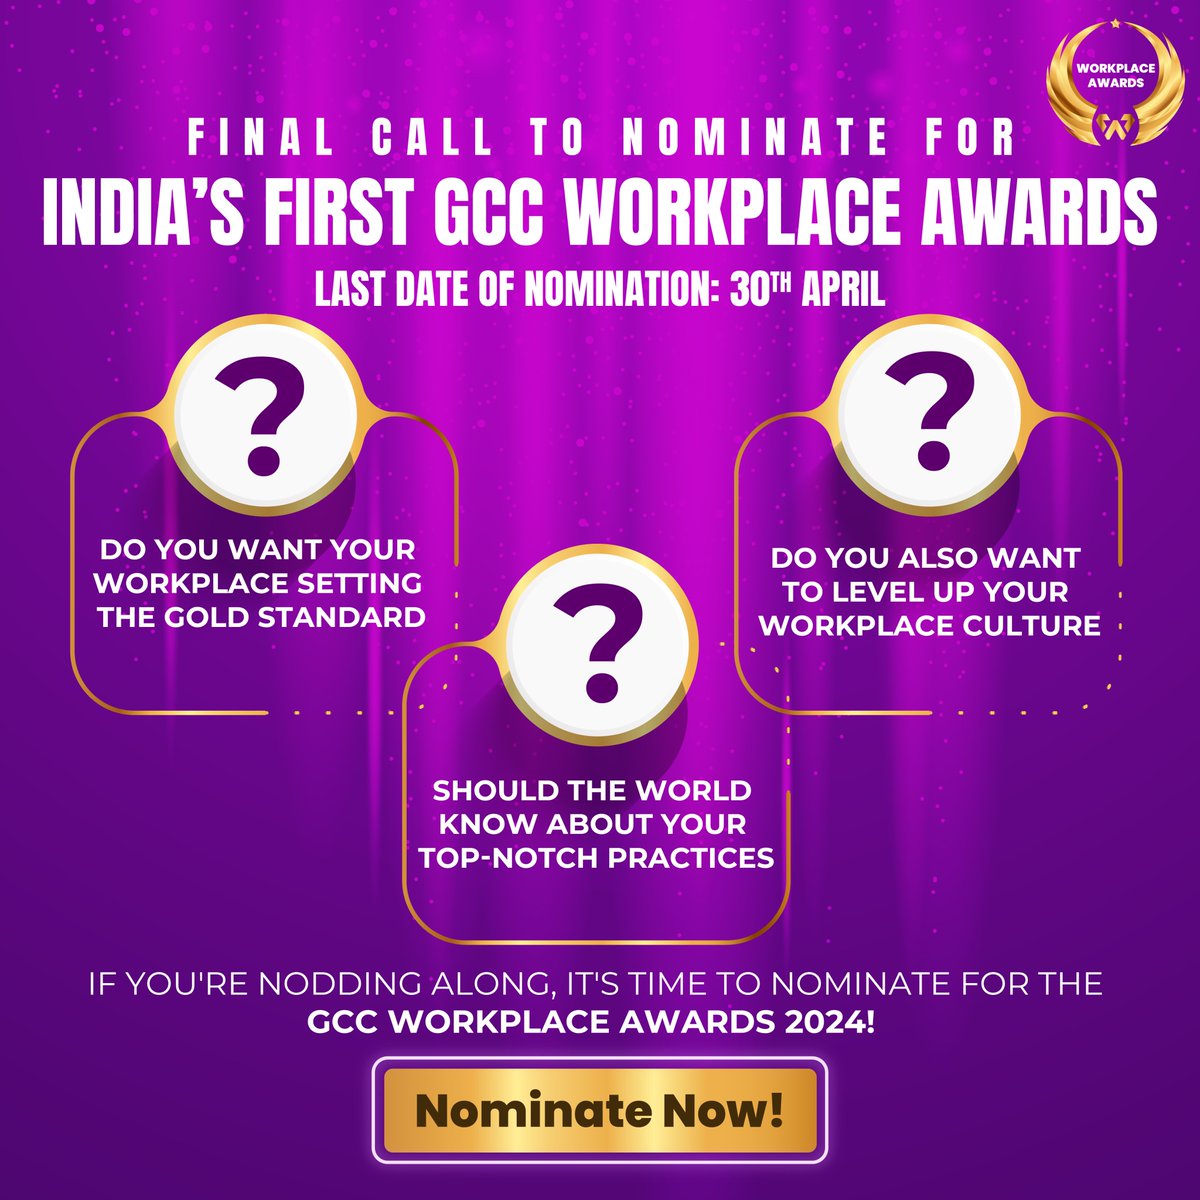 To all the #GCCs,

Is your #workplace setting the gold #standard?
Should the world know about your #top-notch #practices?
Are you ready to elevate your #workplace vibe?

If you're nodding along, it's time to #nominate for the #GCC #Workplace Awards 2024!

Hurry up!